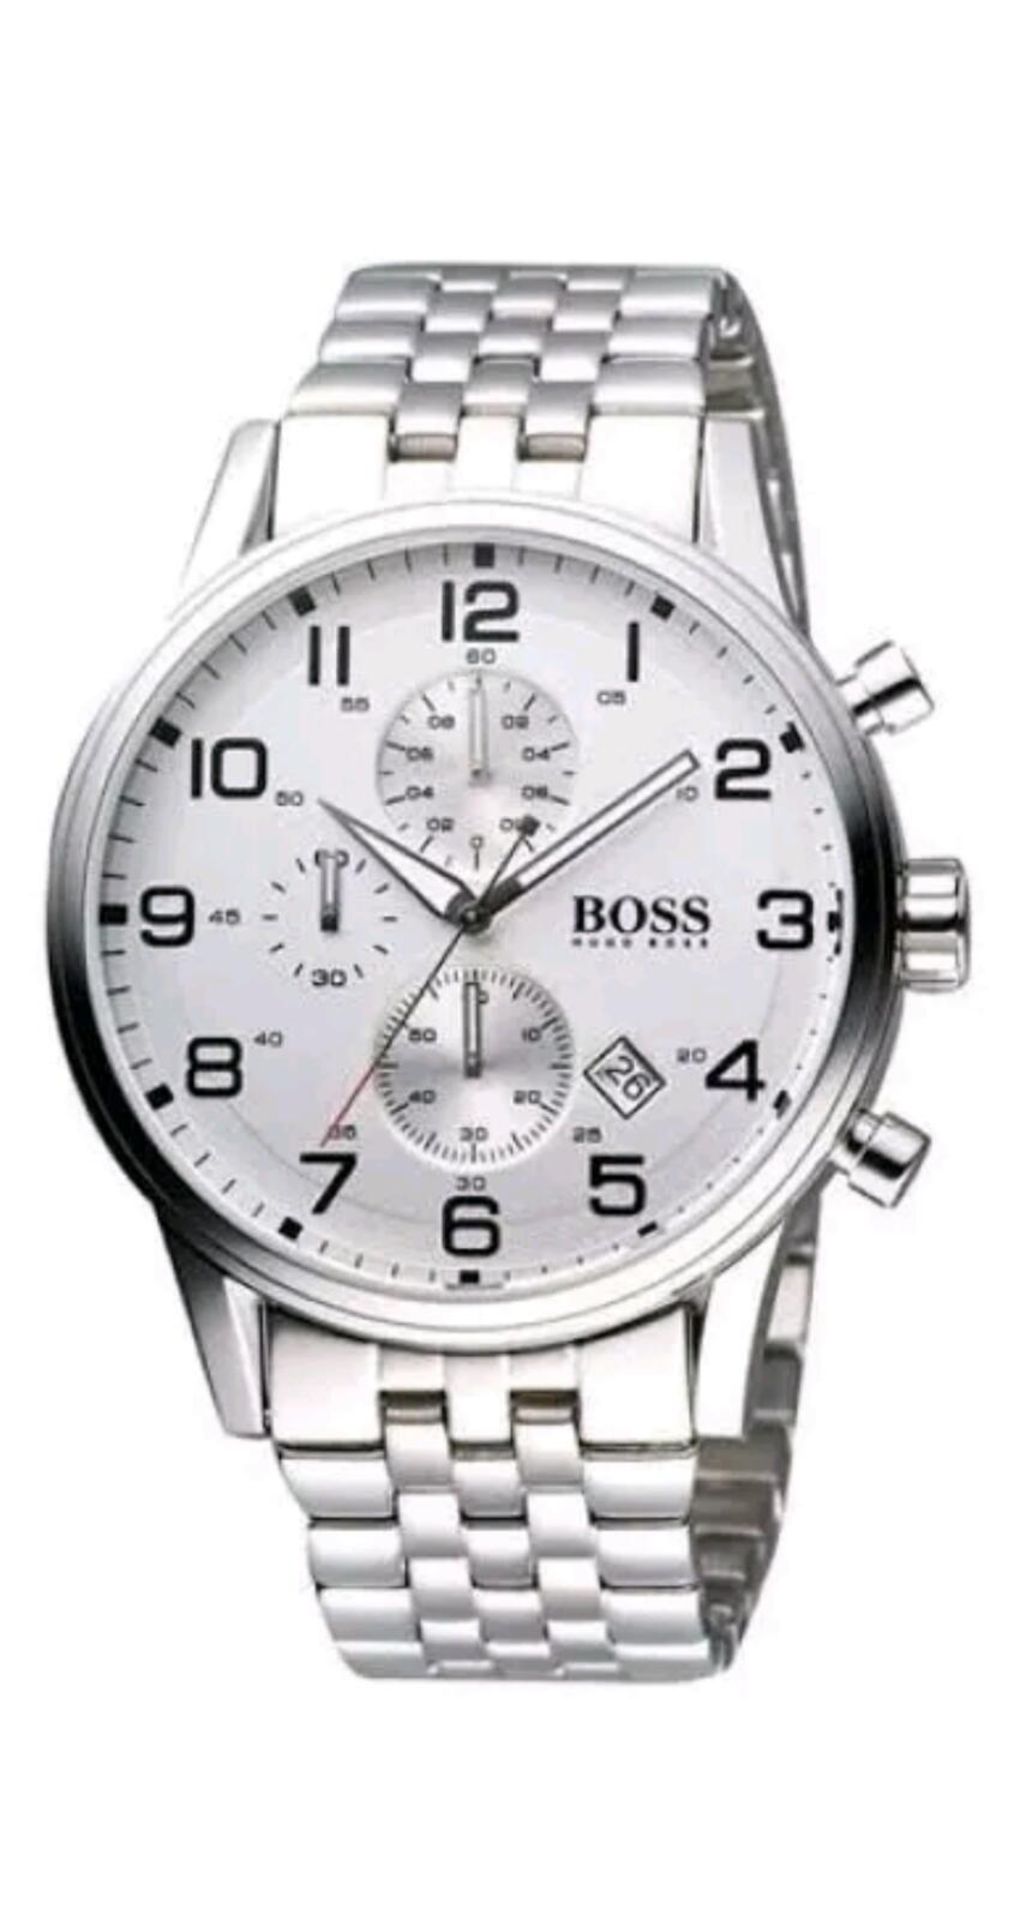 BRAND NEW HUGO BOSS 1512445, COMPLETE WITH ORIGINAL BOX AND MANUAL - RRP £399